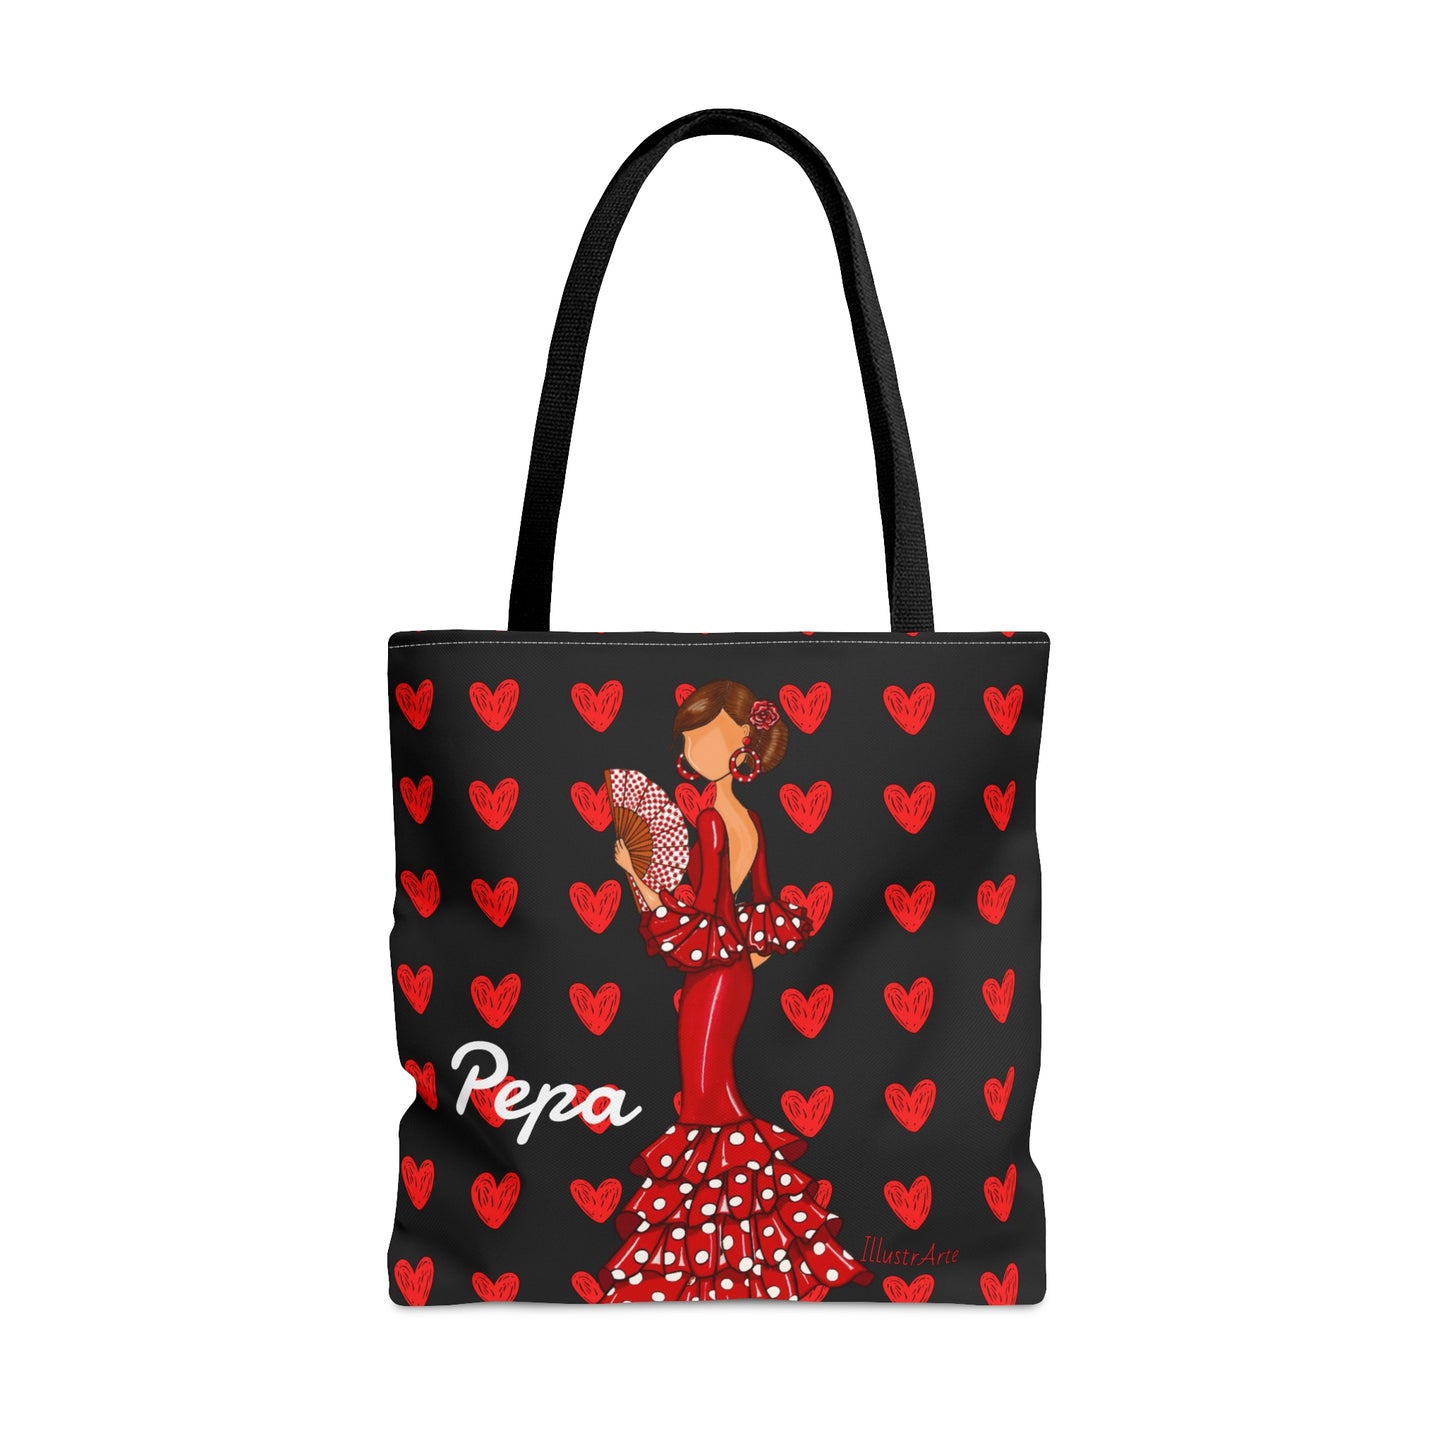 a black tote bag with a lady in a red dress holding a fan